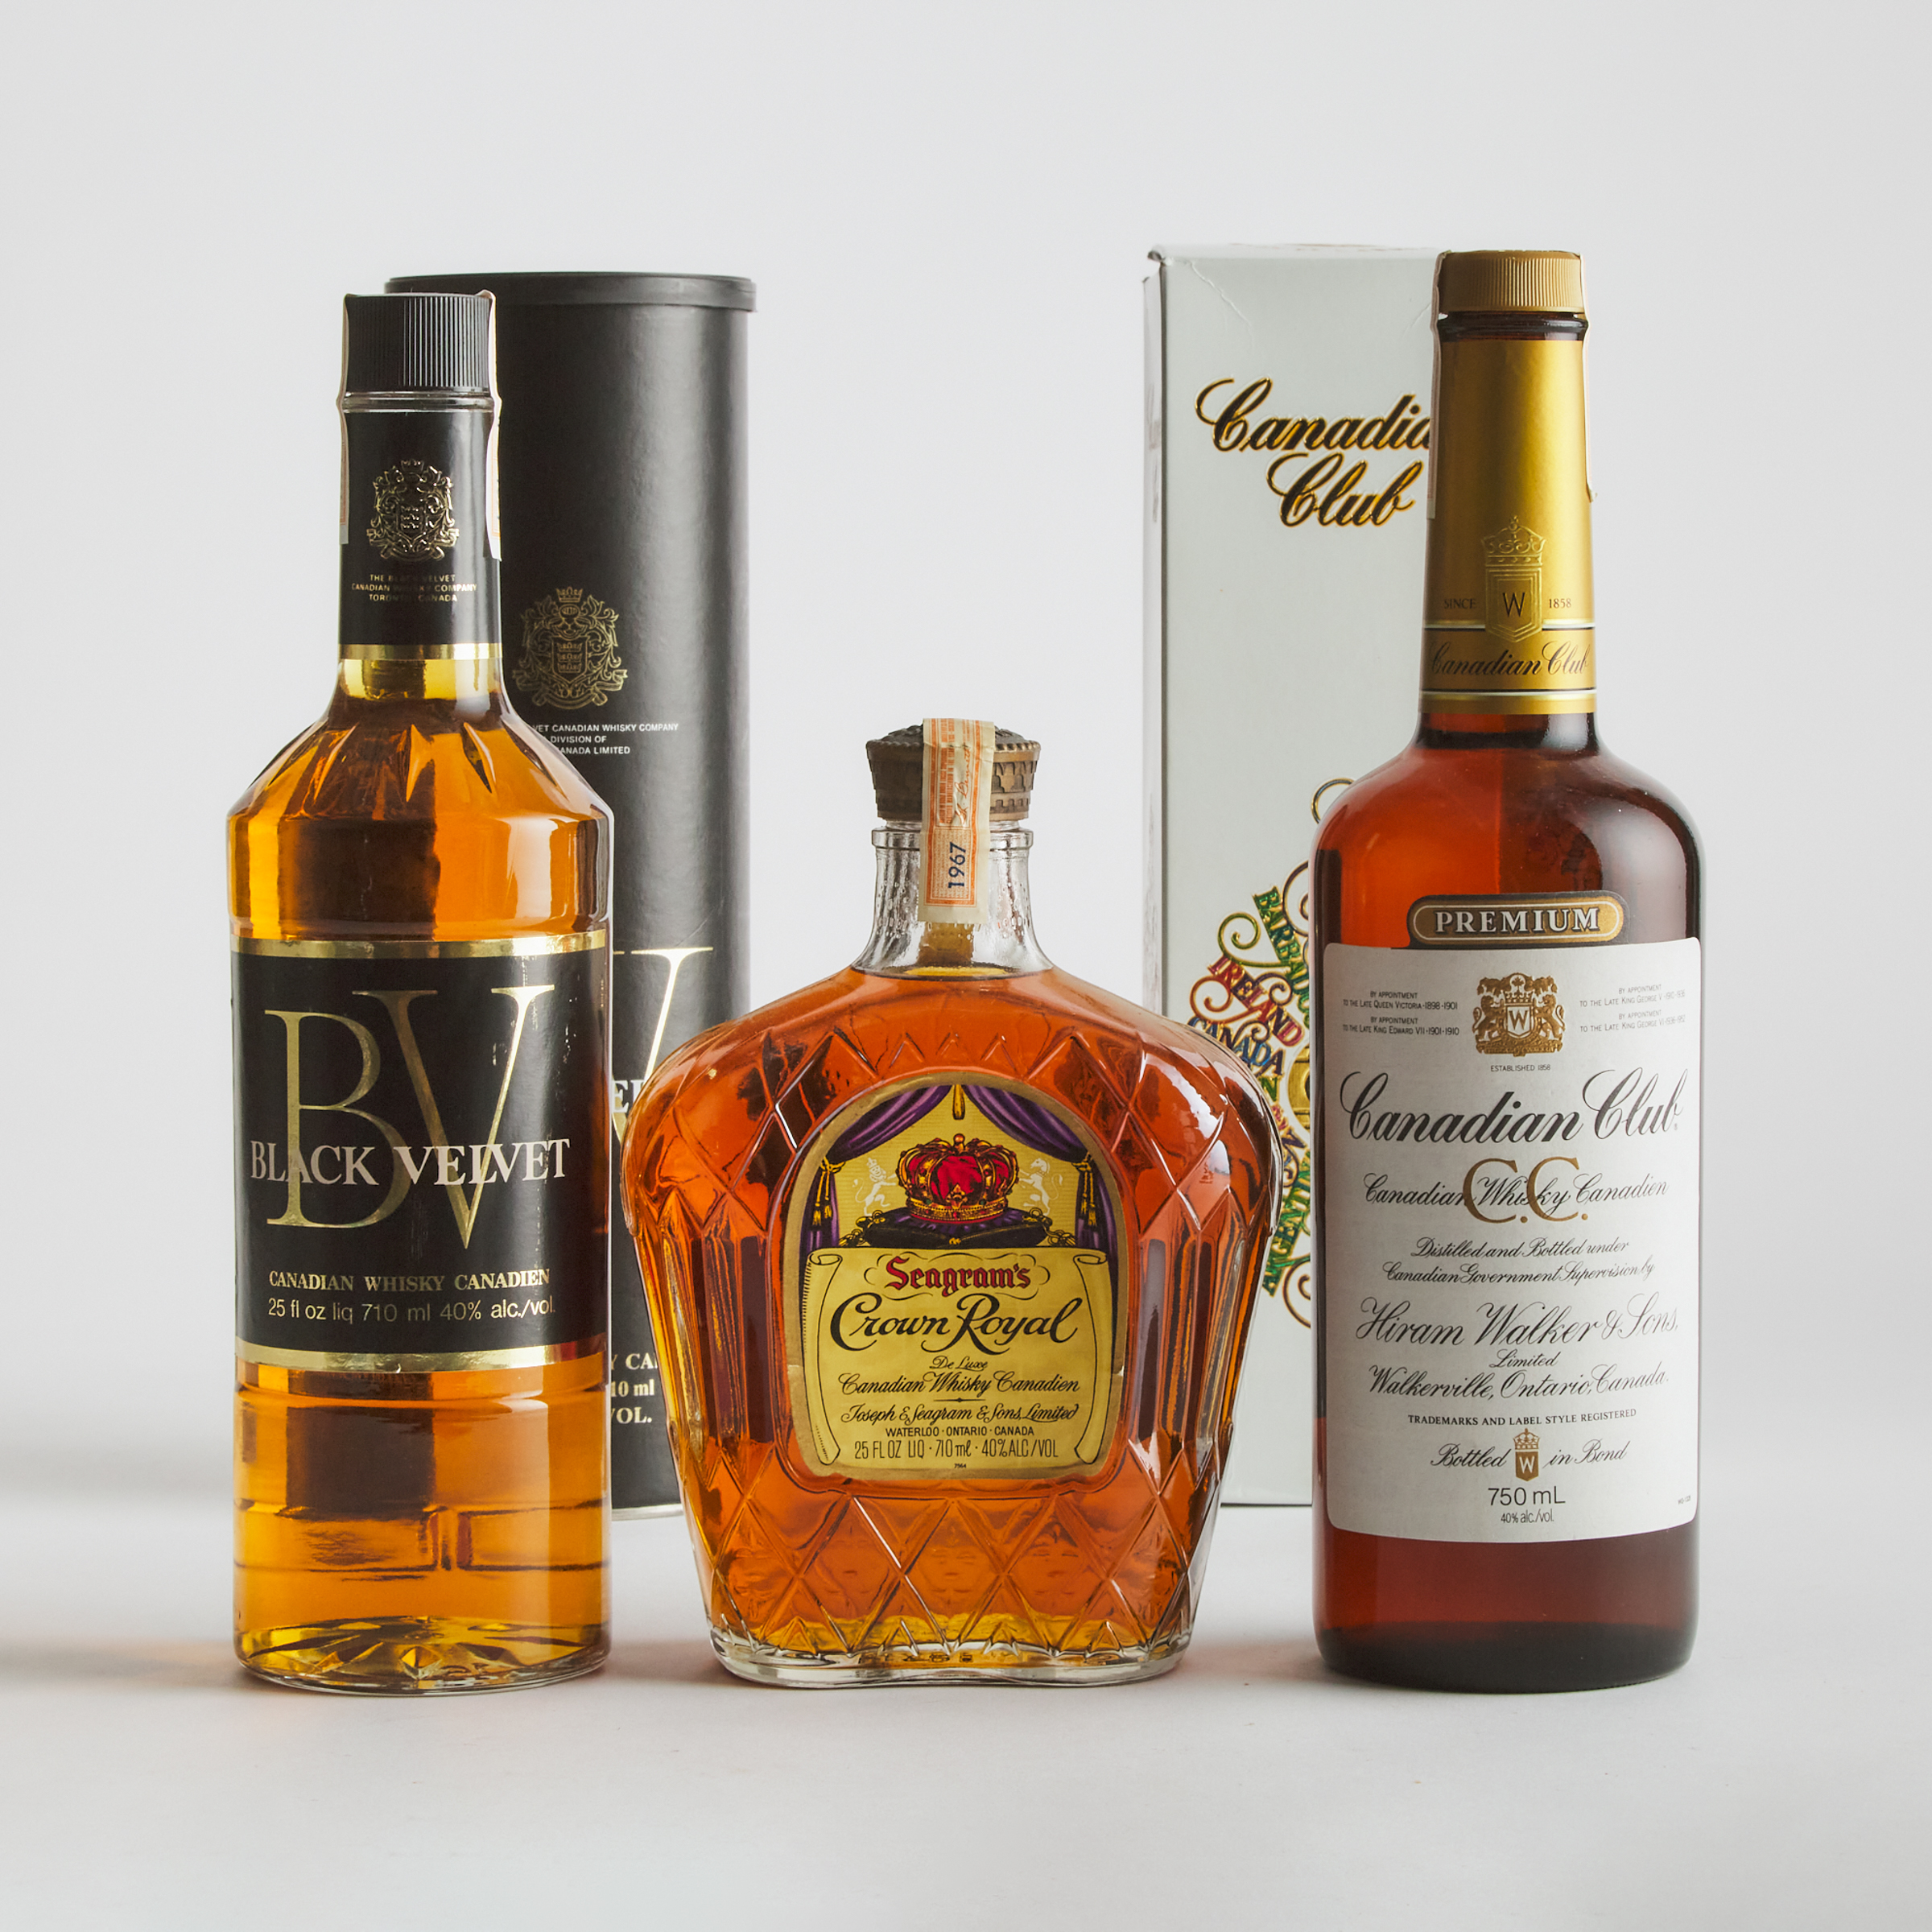 BLACK VELVET CANADIAN WHISKEY (ONE 710 ML)
CANADIAN CLUB CANADIAN WHISKY (ONE 750 ML)
CROWN ROYAL DELUXE CANADIAN WHISKY NAS (ONE 710 ML)